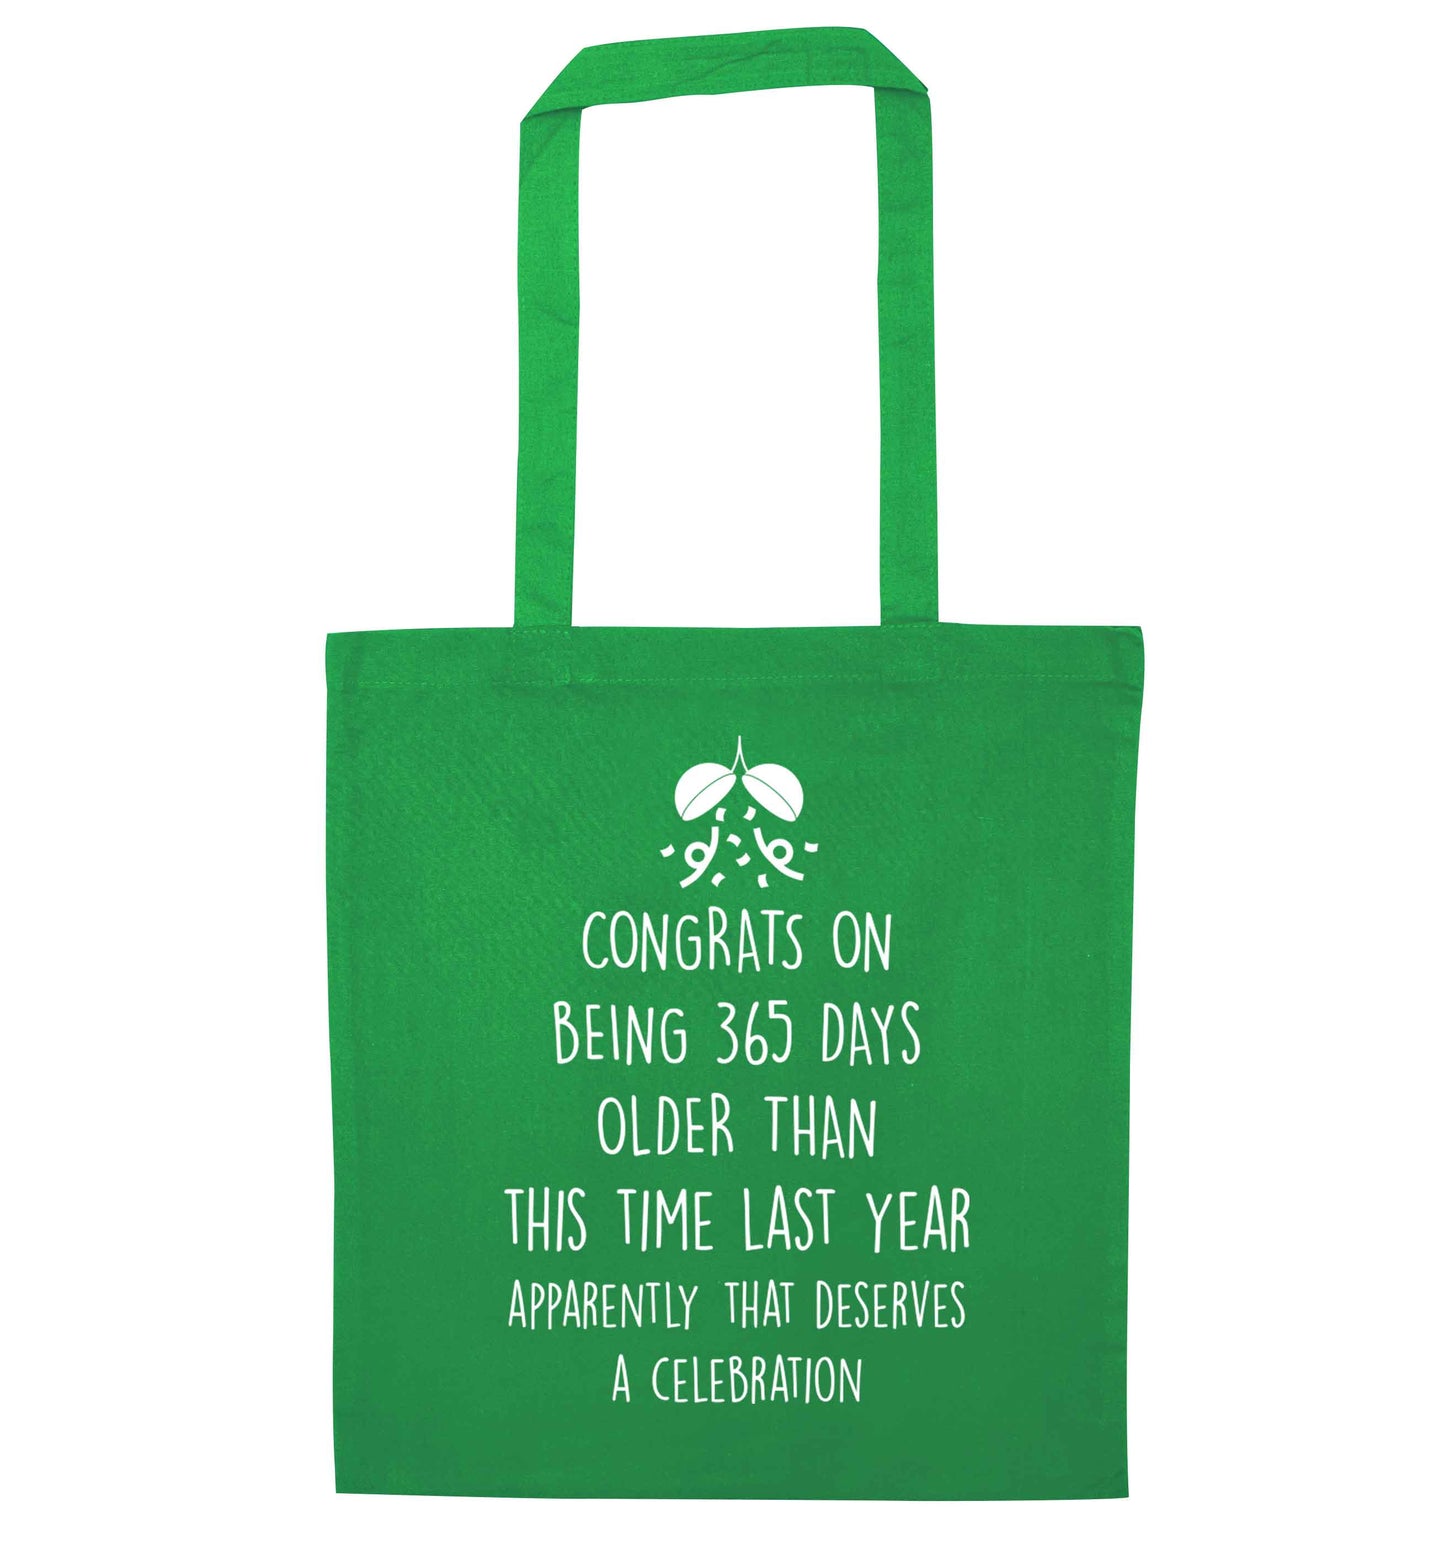 Congrats on being 365 days older than you were this time last year apparently that deserves a celebration green tote bag